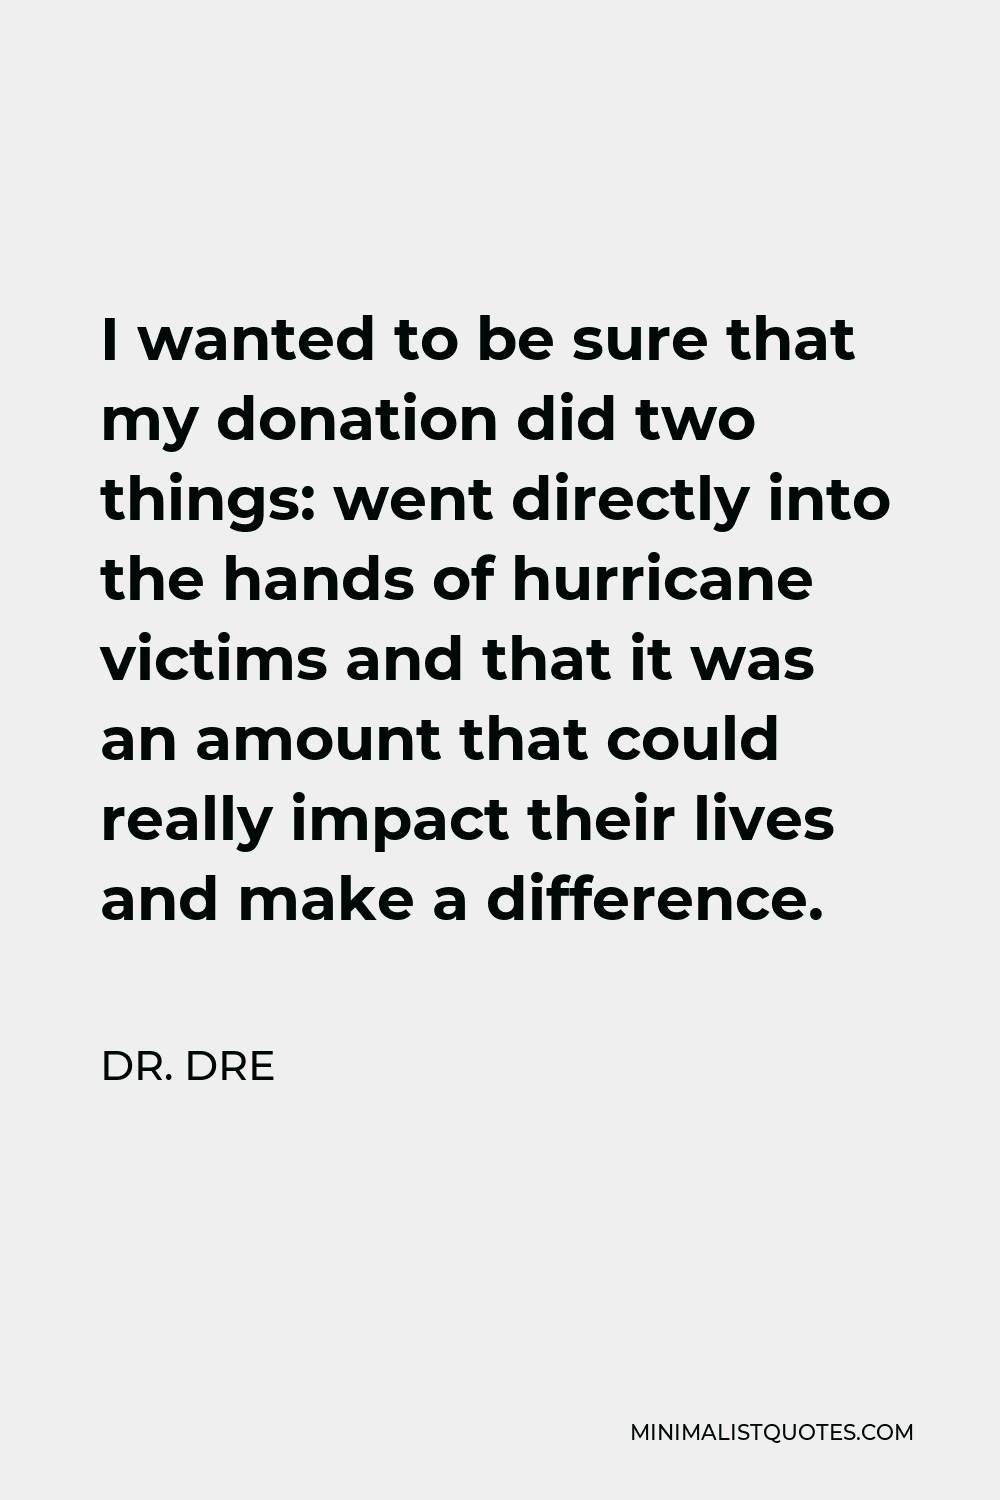 Dr. Dre Quote - I wanted to be sure that my donation did two things: went directly into the hands of hurricane victims and that it was an amount that could really impact their lives and make a difference.